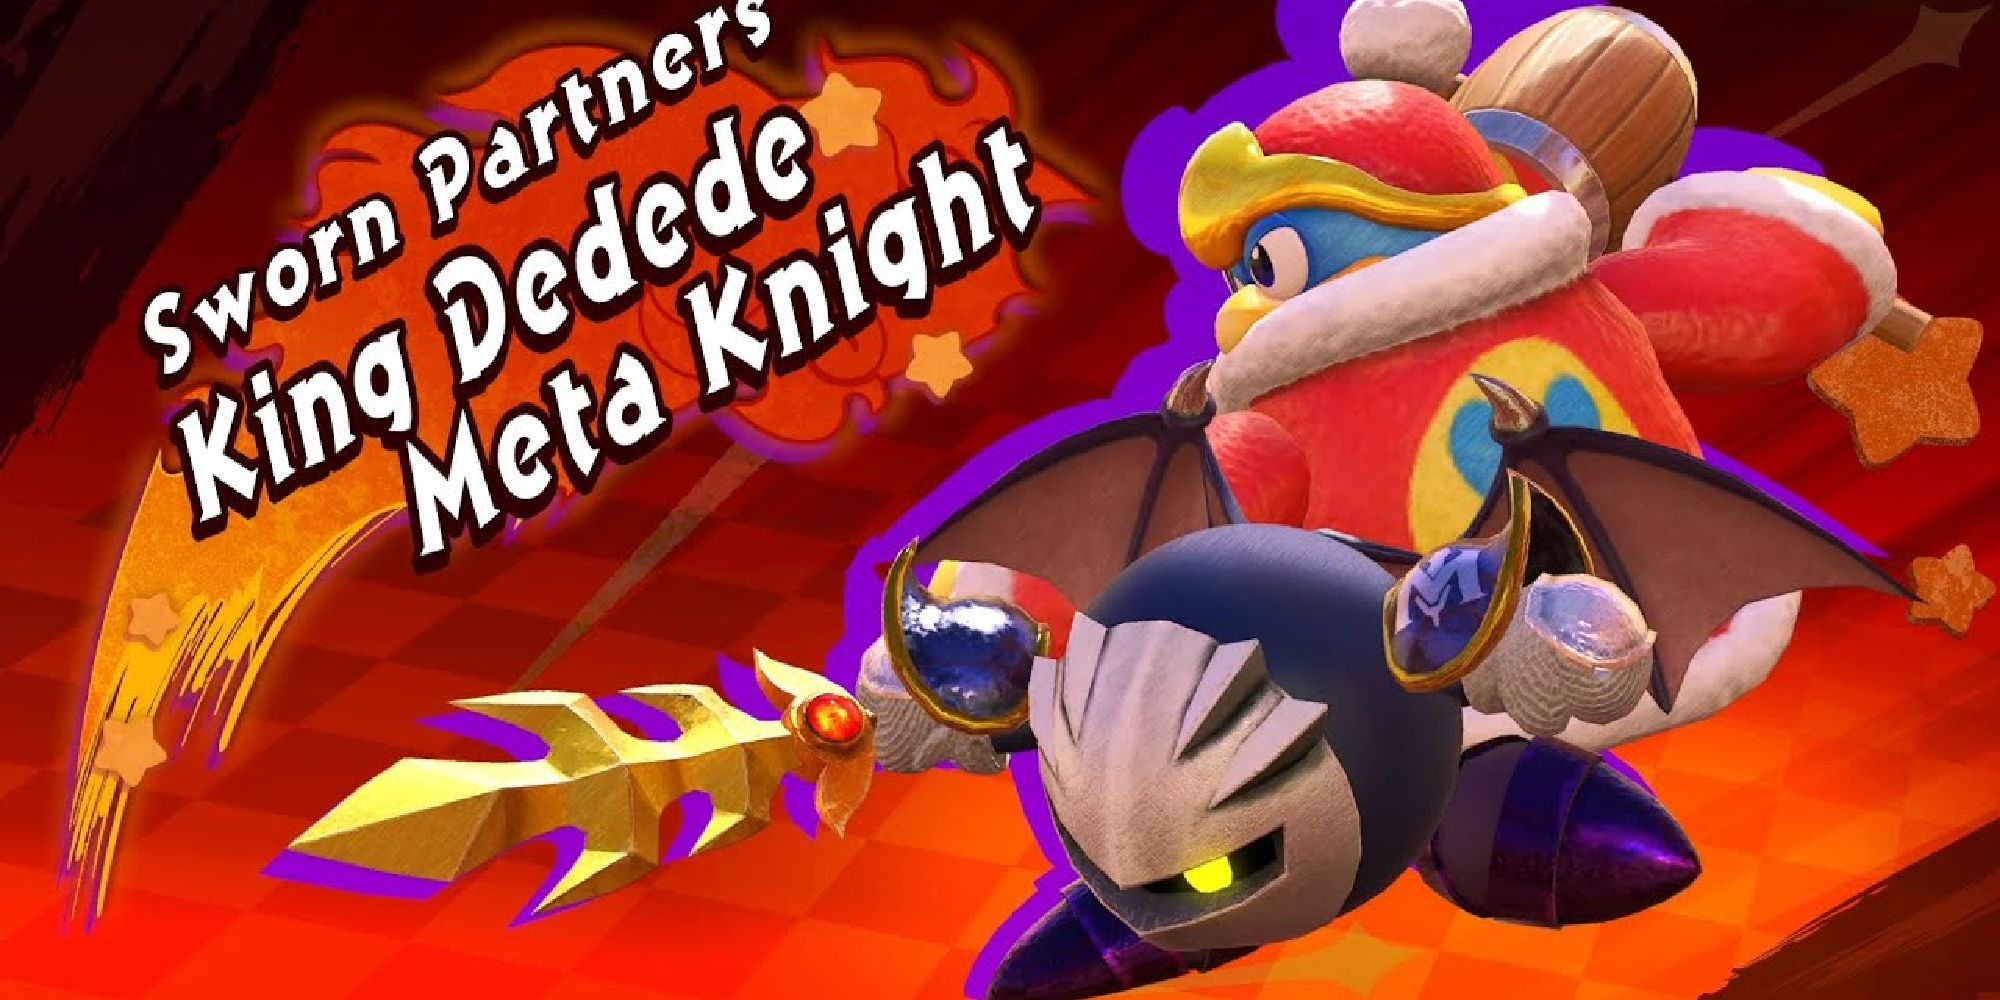 Meta Knight teamed up with King Dedede in an intro from Kirby Fighters 2